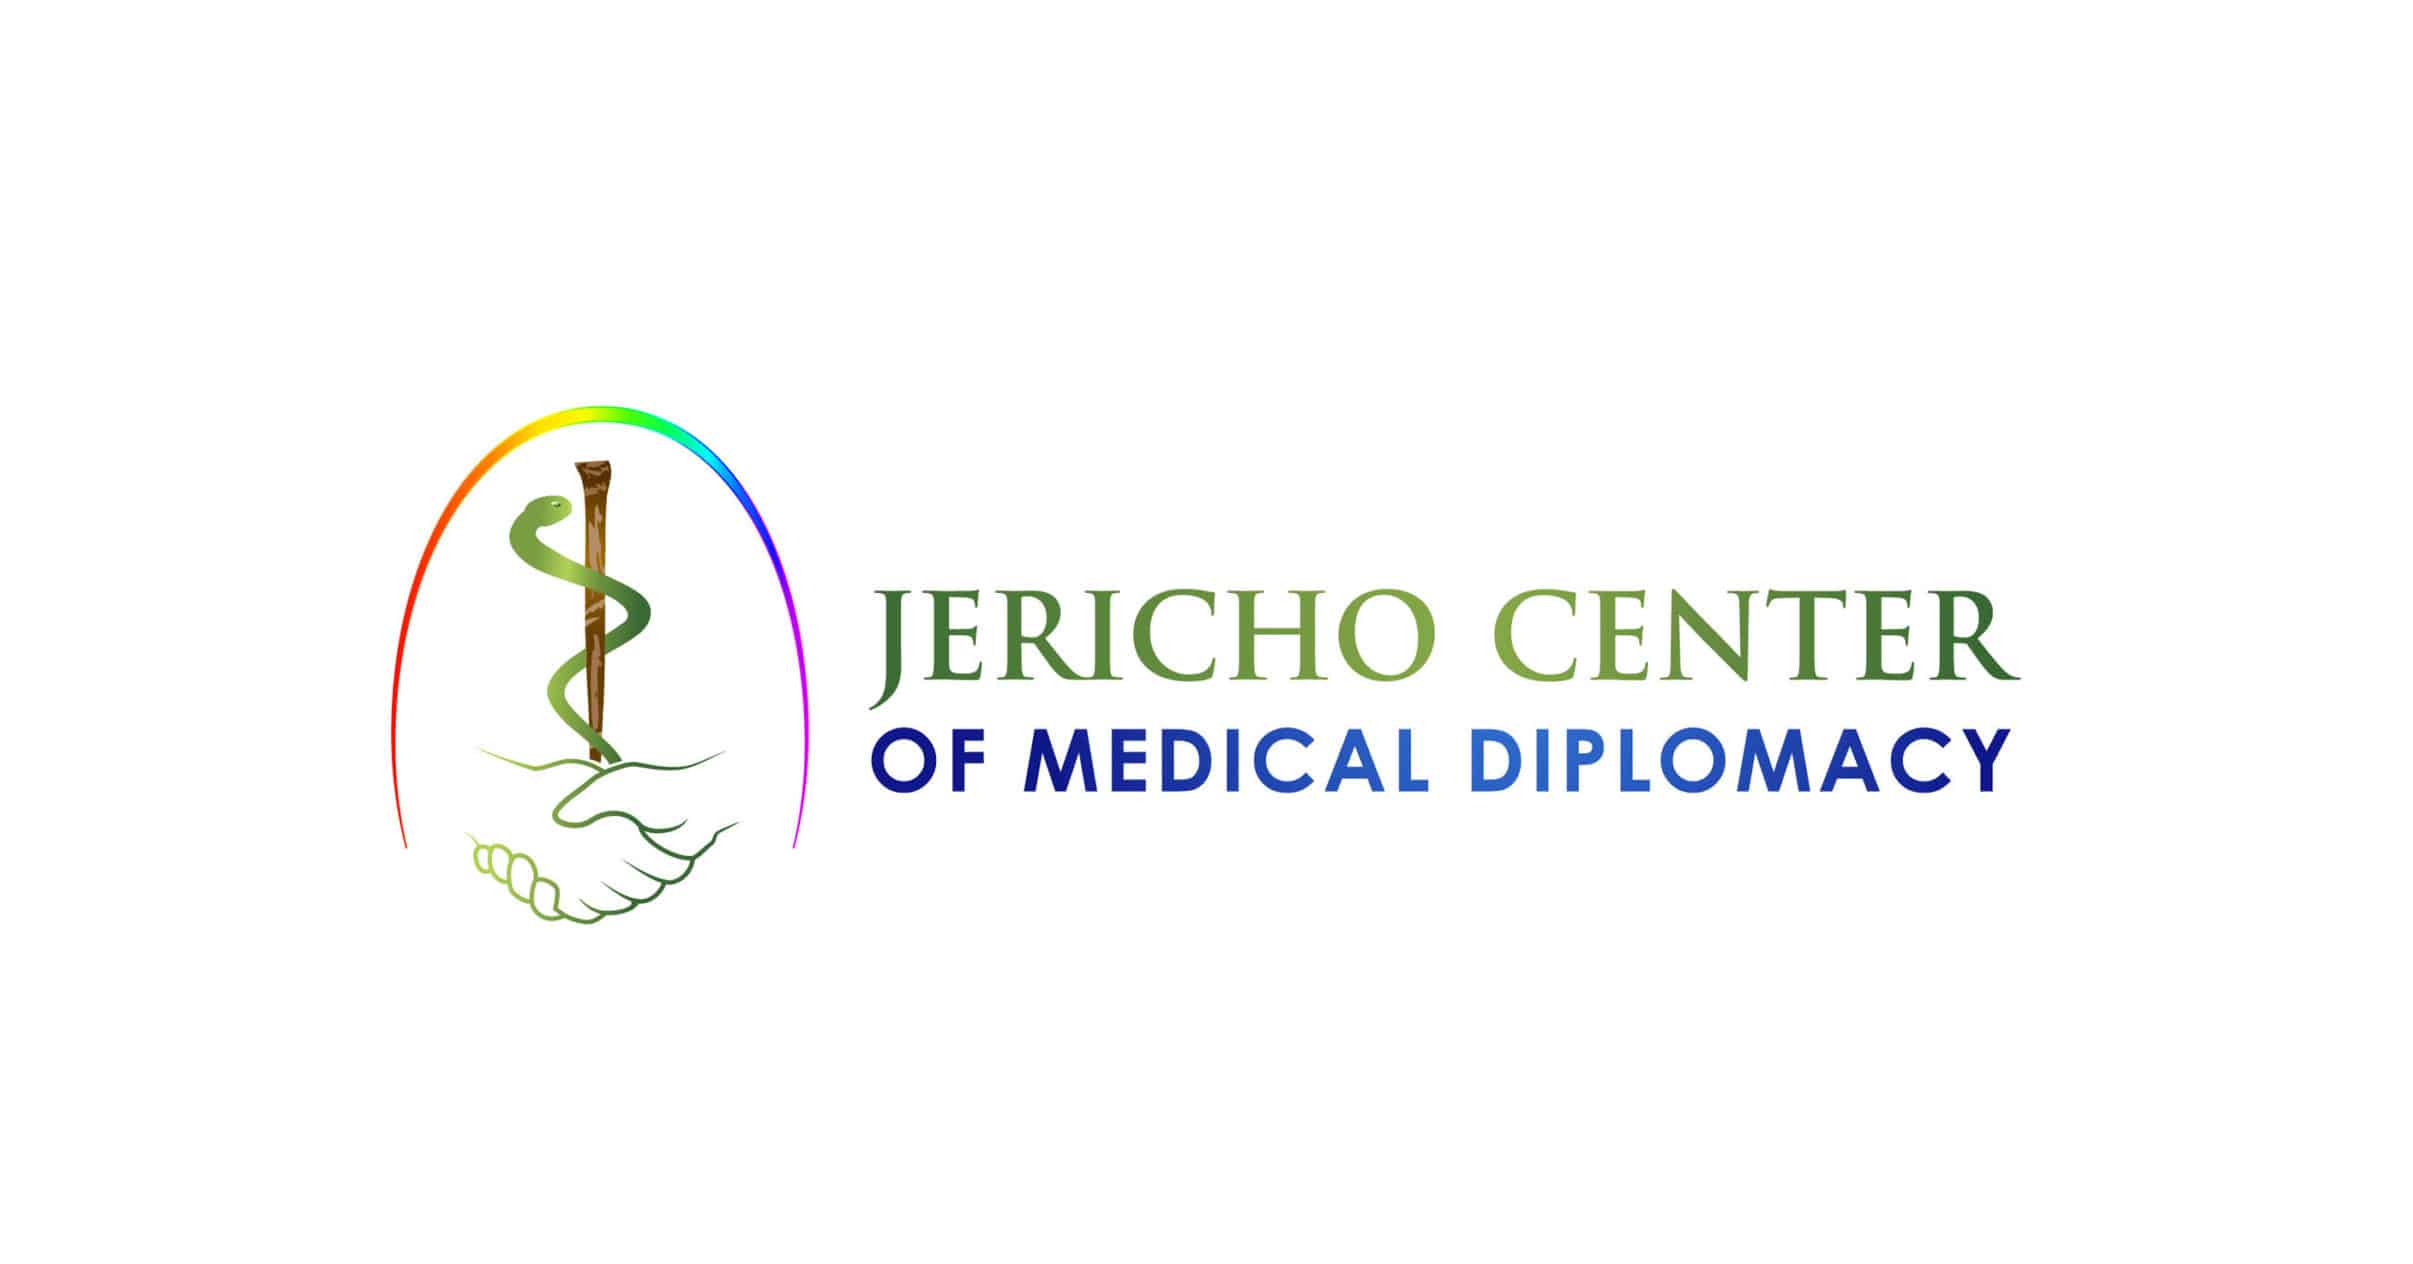 Jericho Center of Medical Diplomacy